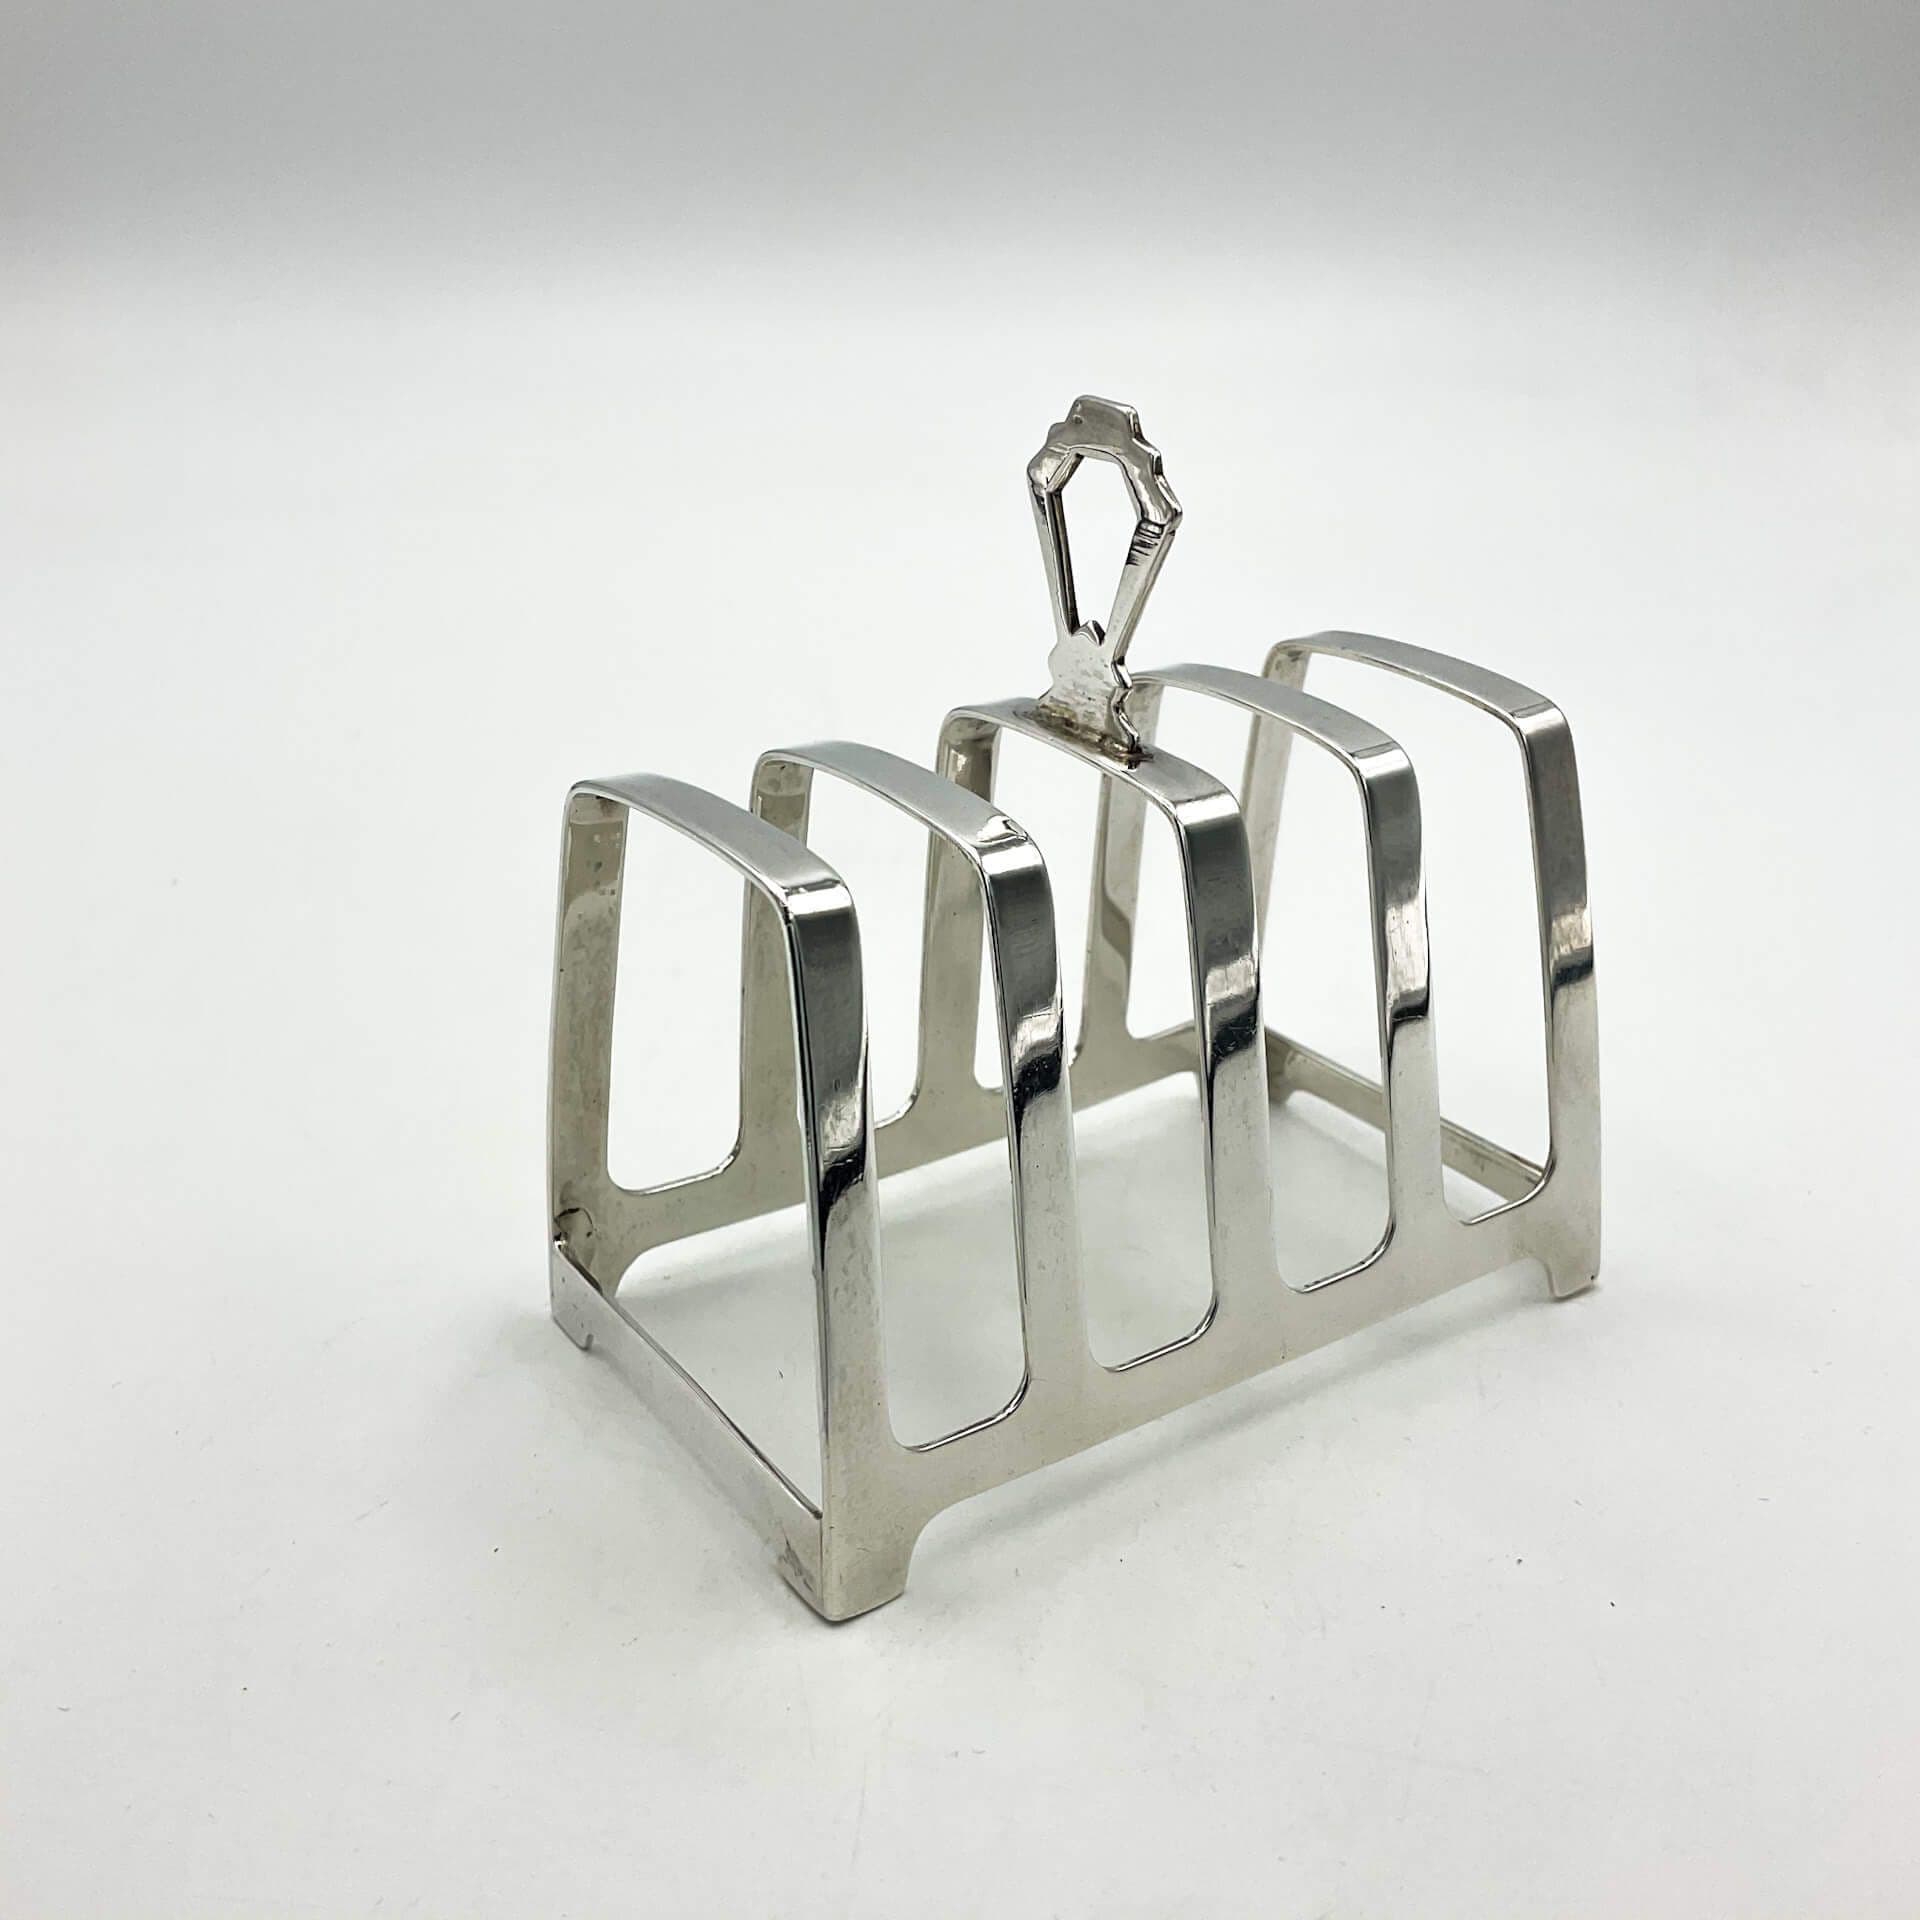 Art deco style silver toast rack on a white background.